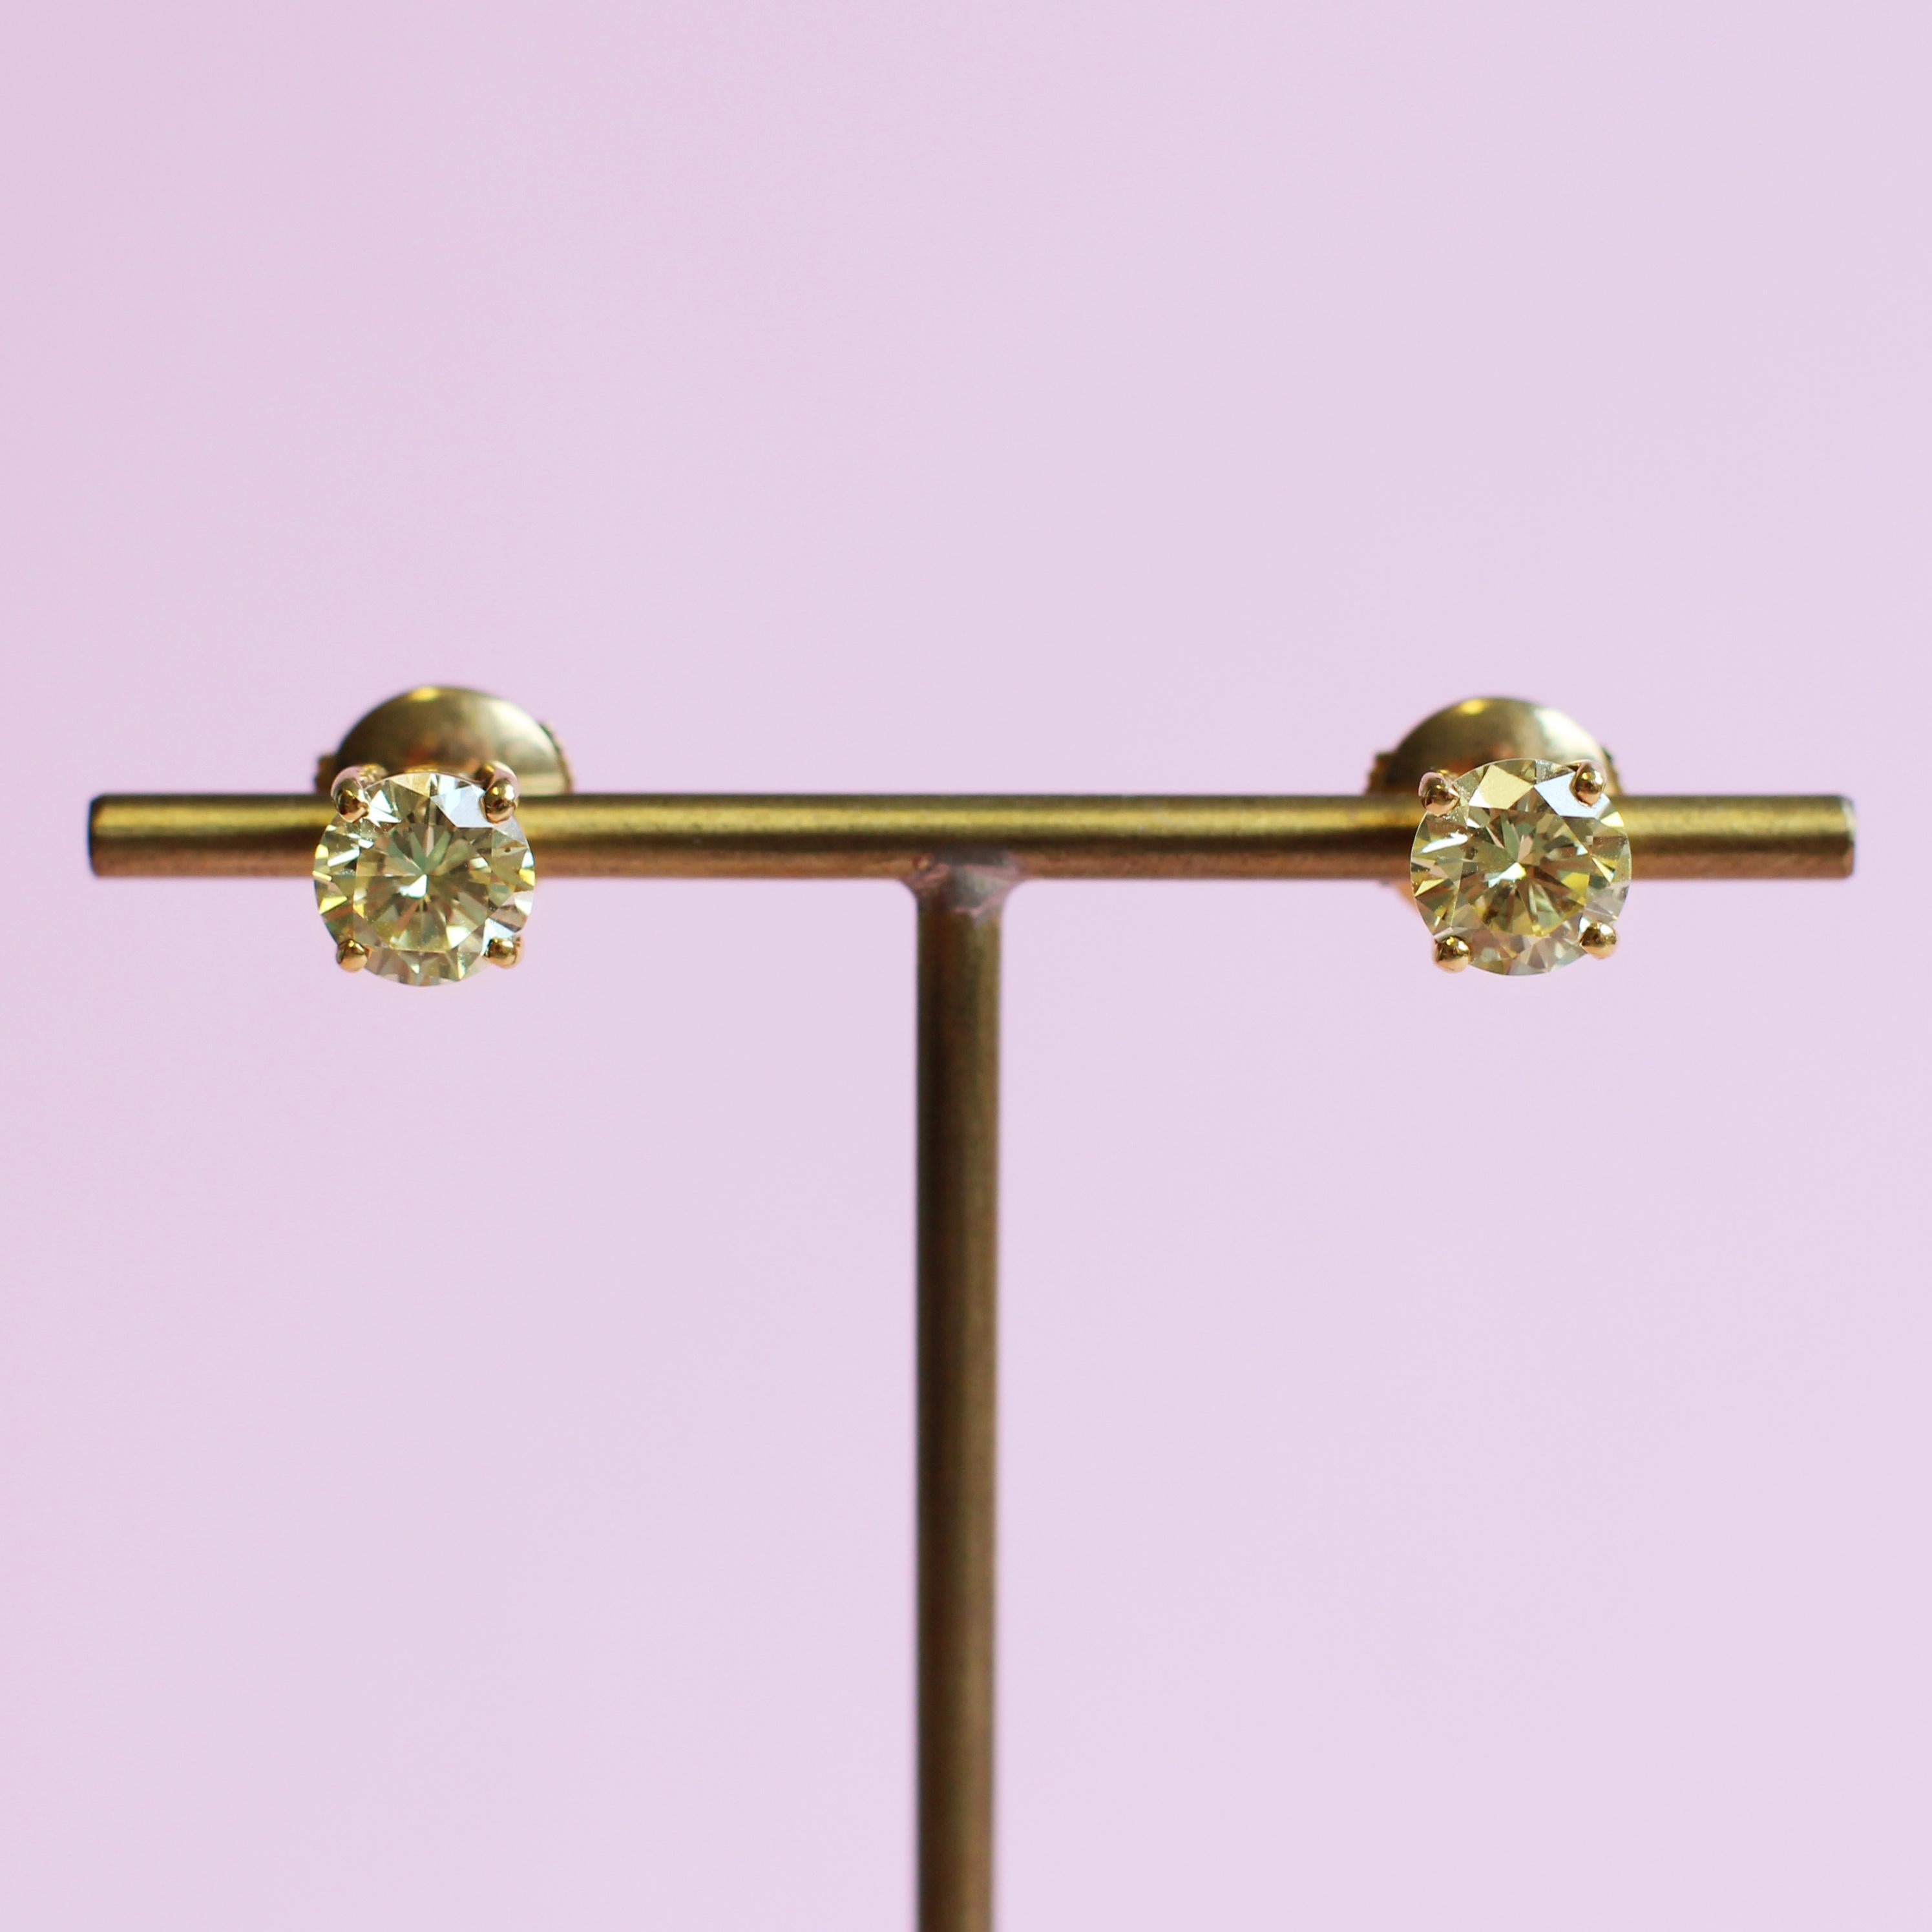 Handmade in the Haruni atelier, these graceful stud earrings exude understated elegance. The simple, classic design features delicately coloured yellow diamonds in a round cut, set in 18 karat yellow gold, for a warm, inviting look that flatters the